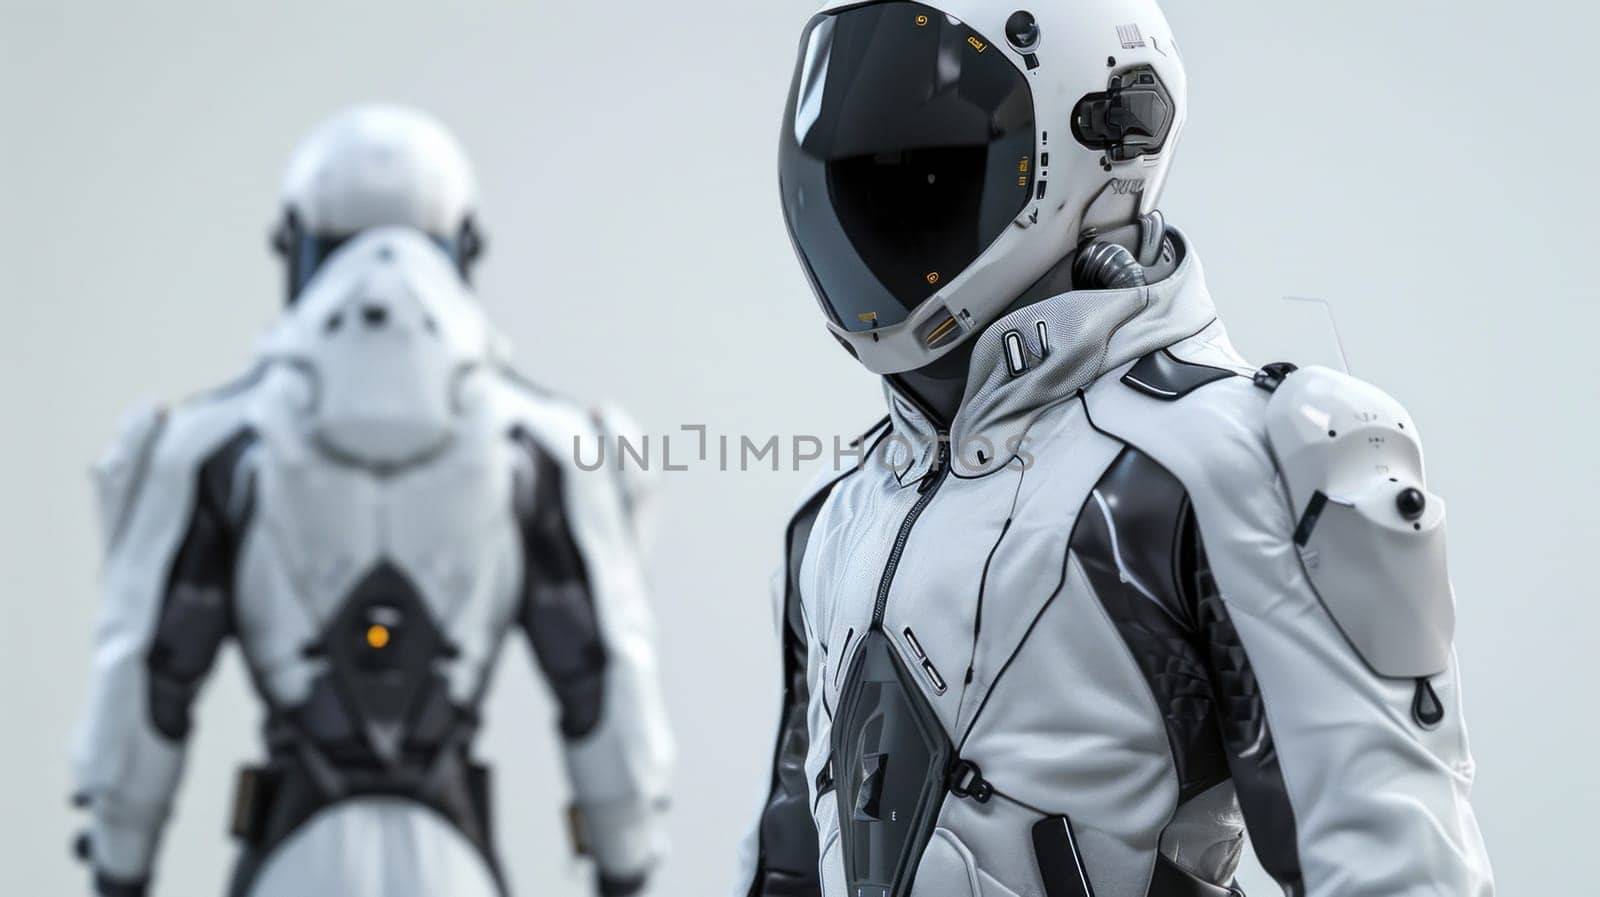 A close up of a white and black suit with helmet